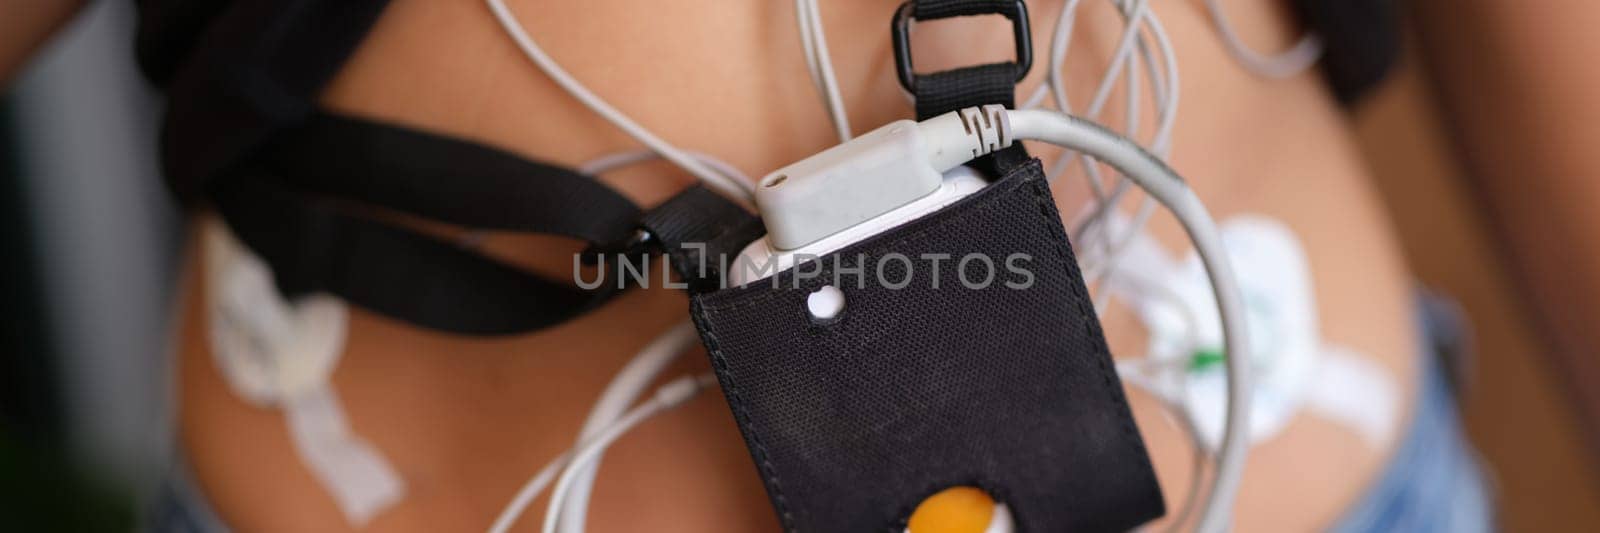 Ecg holter monitor hanging on patient body closeup. Diagnosis of rhythm and conduction disorders concept